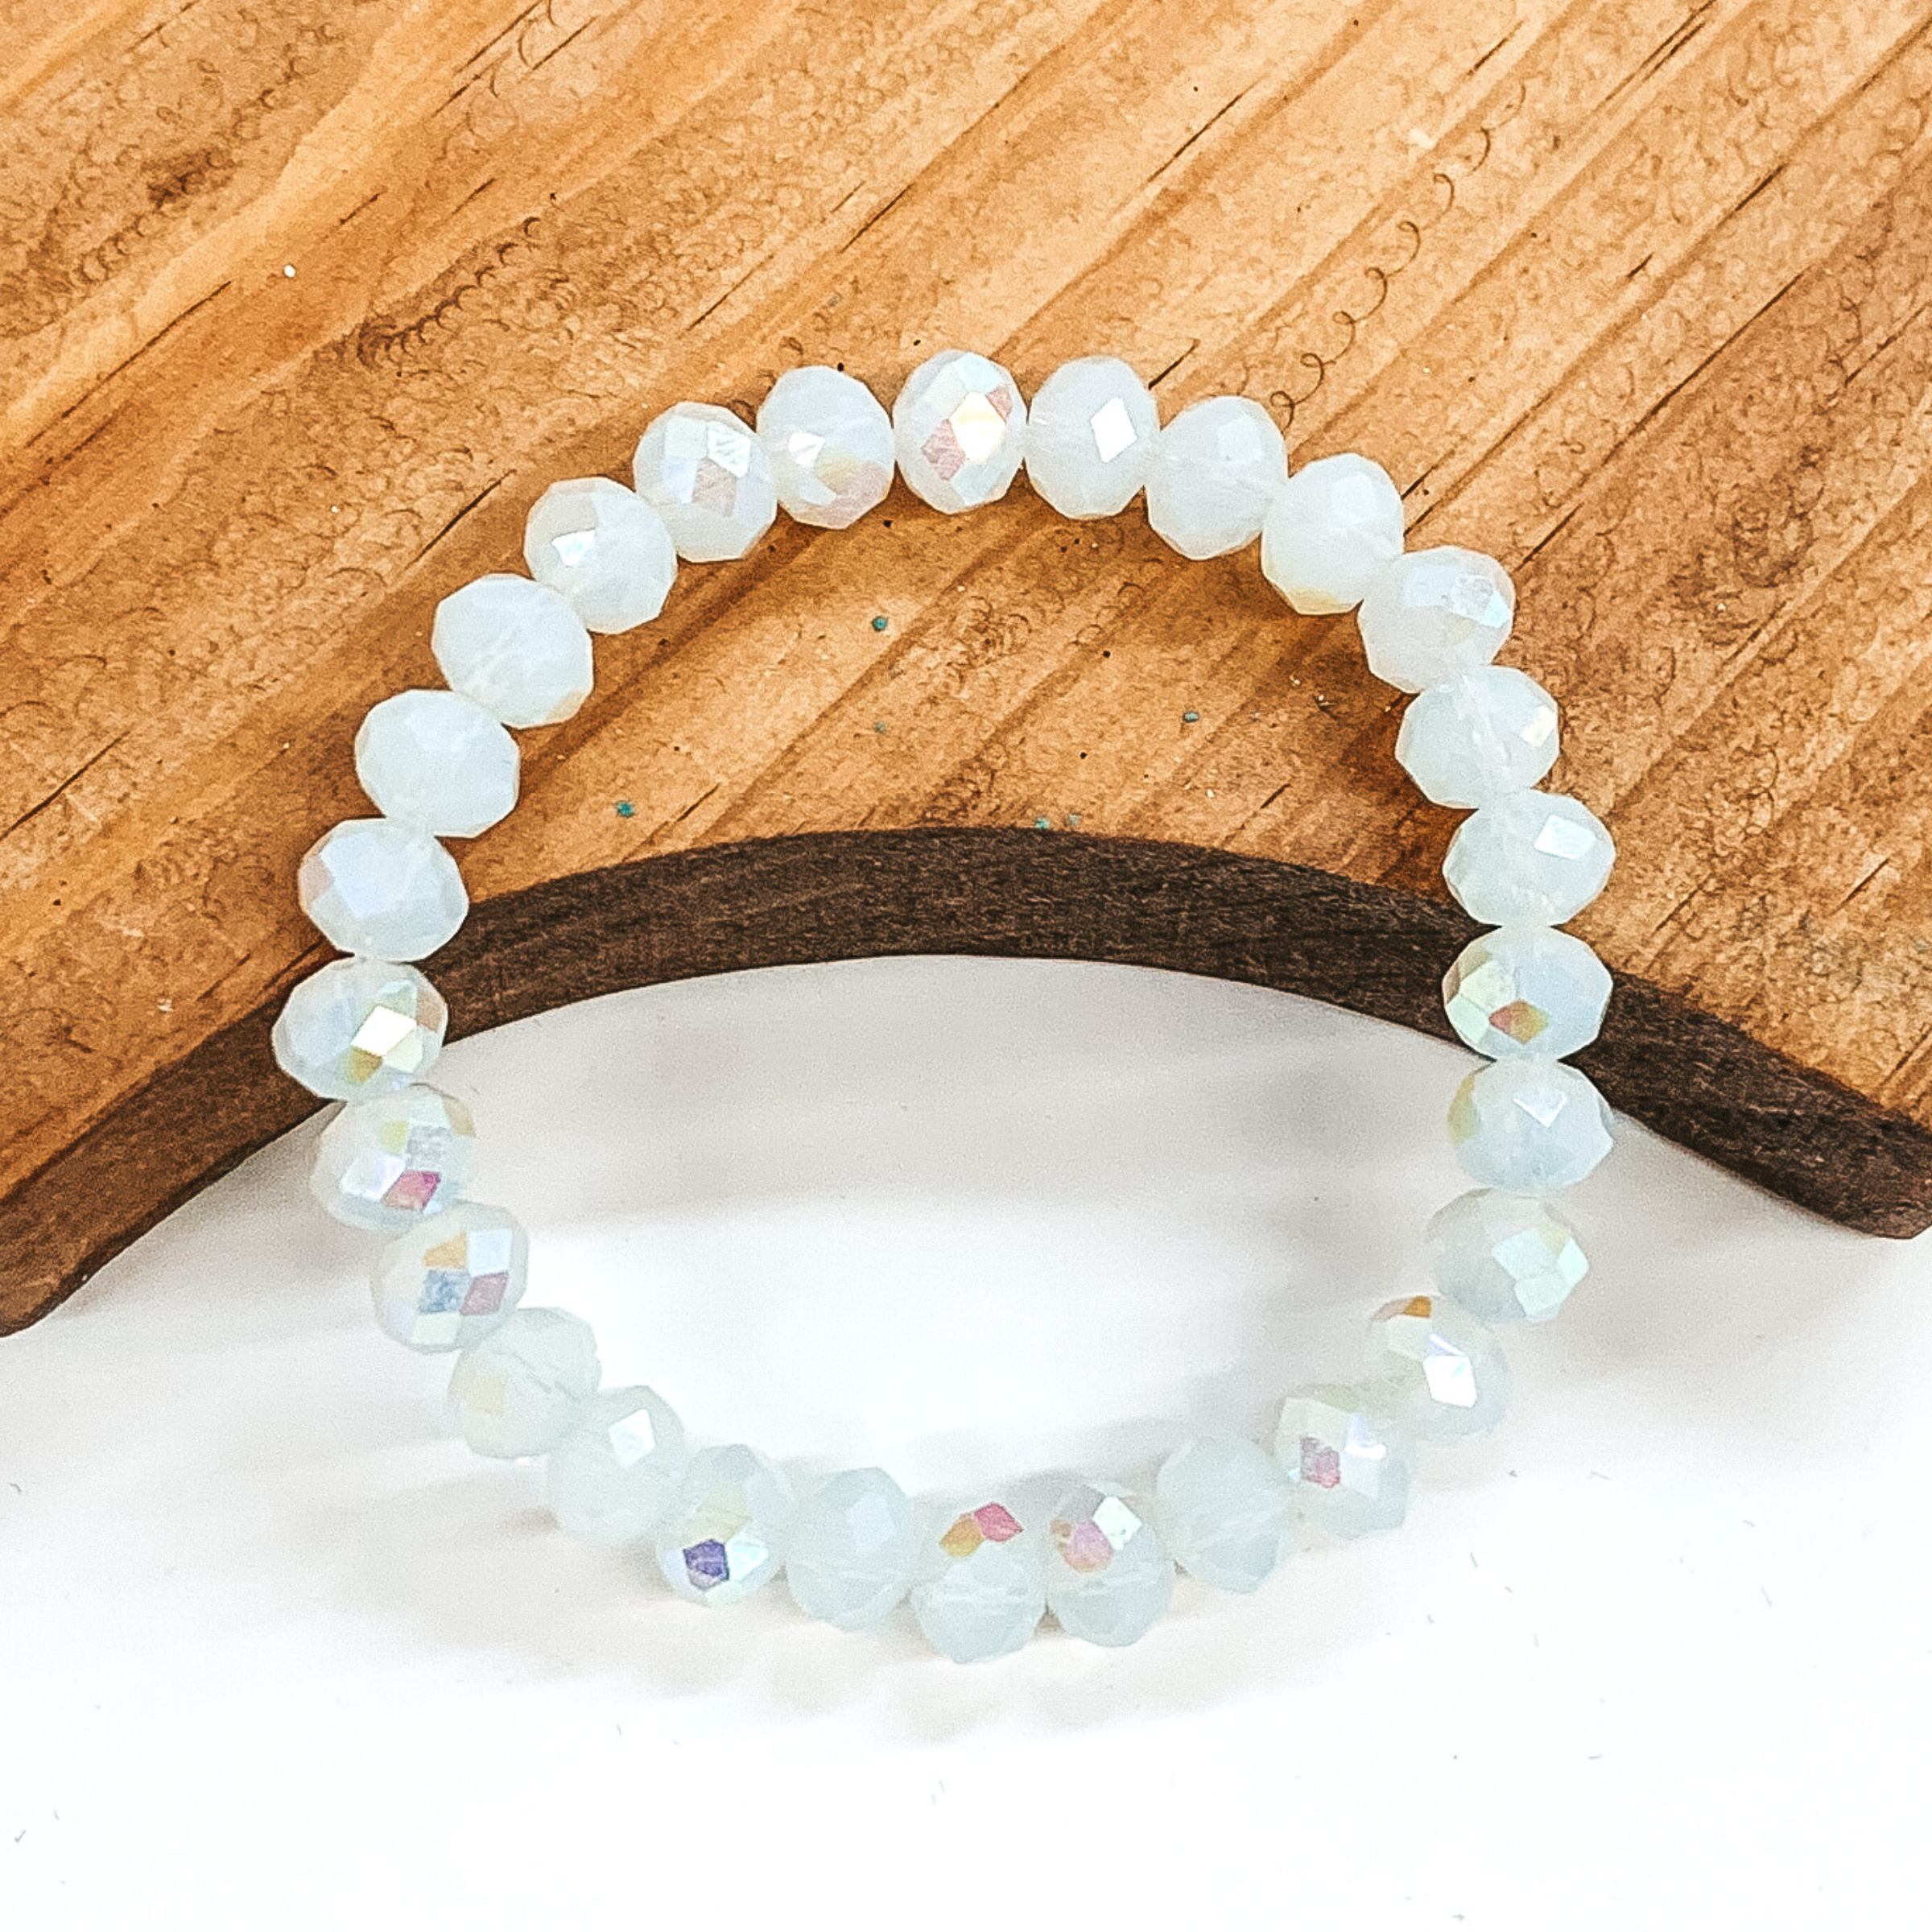 White AB crystal beaded bracelet. This bracelet is pictured laying partially on a brown block on a white background.